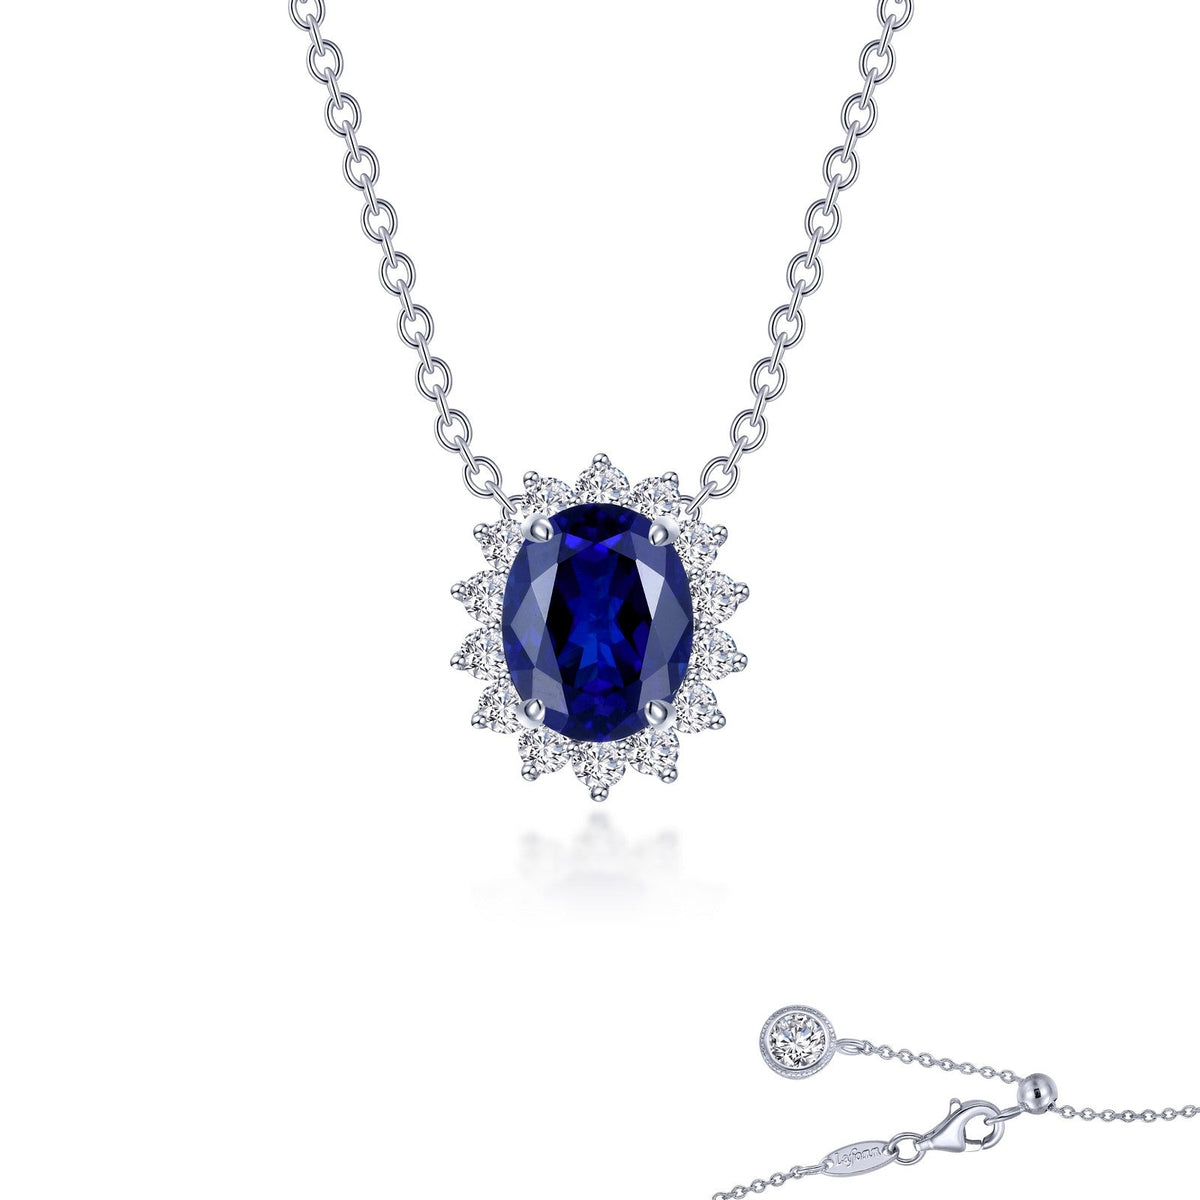 Lafonn Simulated Diamond &amp; Fancy Lab Grown Sapphire 3.35ct. Halo Necklace SYN024SP20